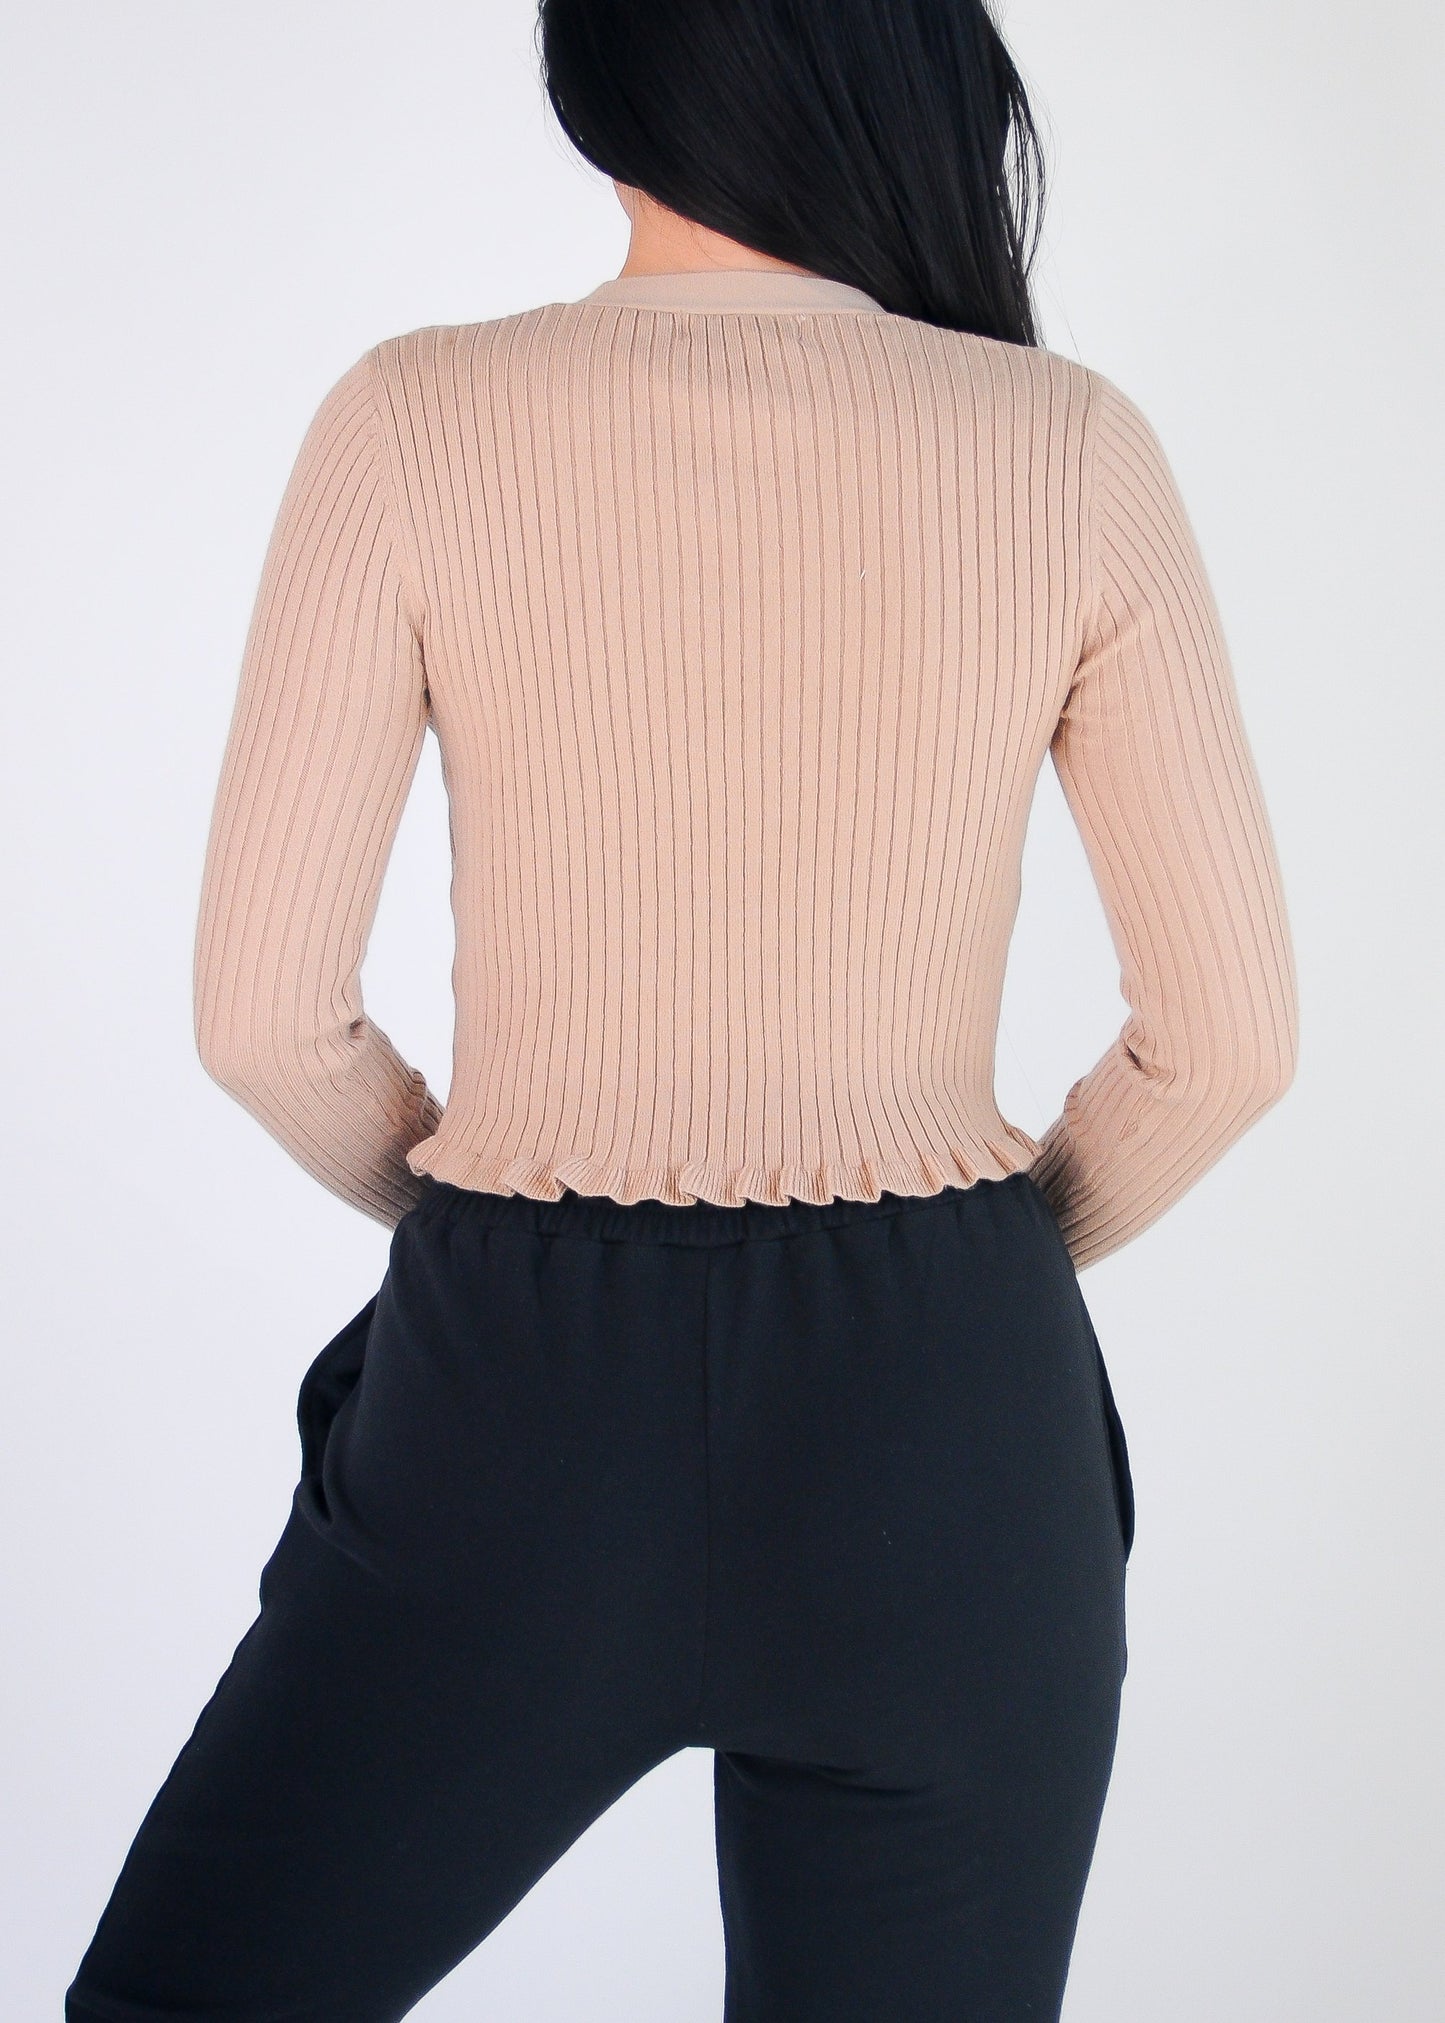 Single button cardigan crop top with ruffle details